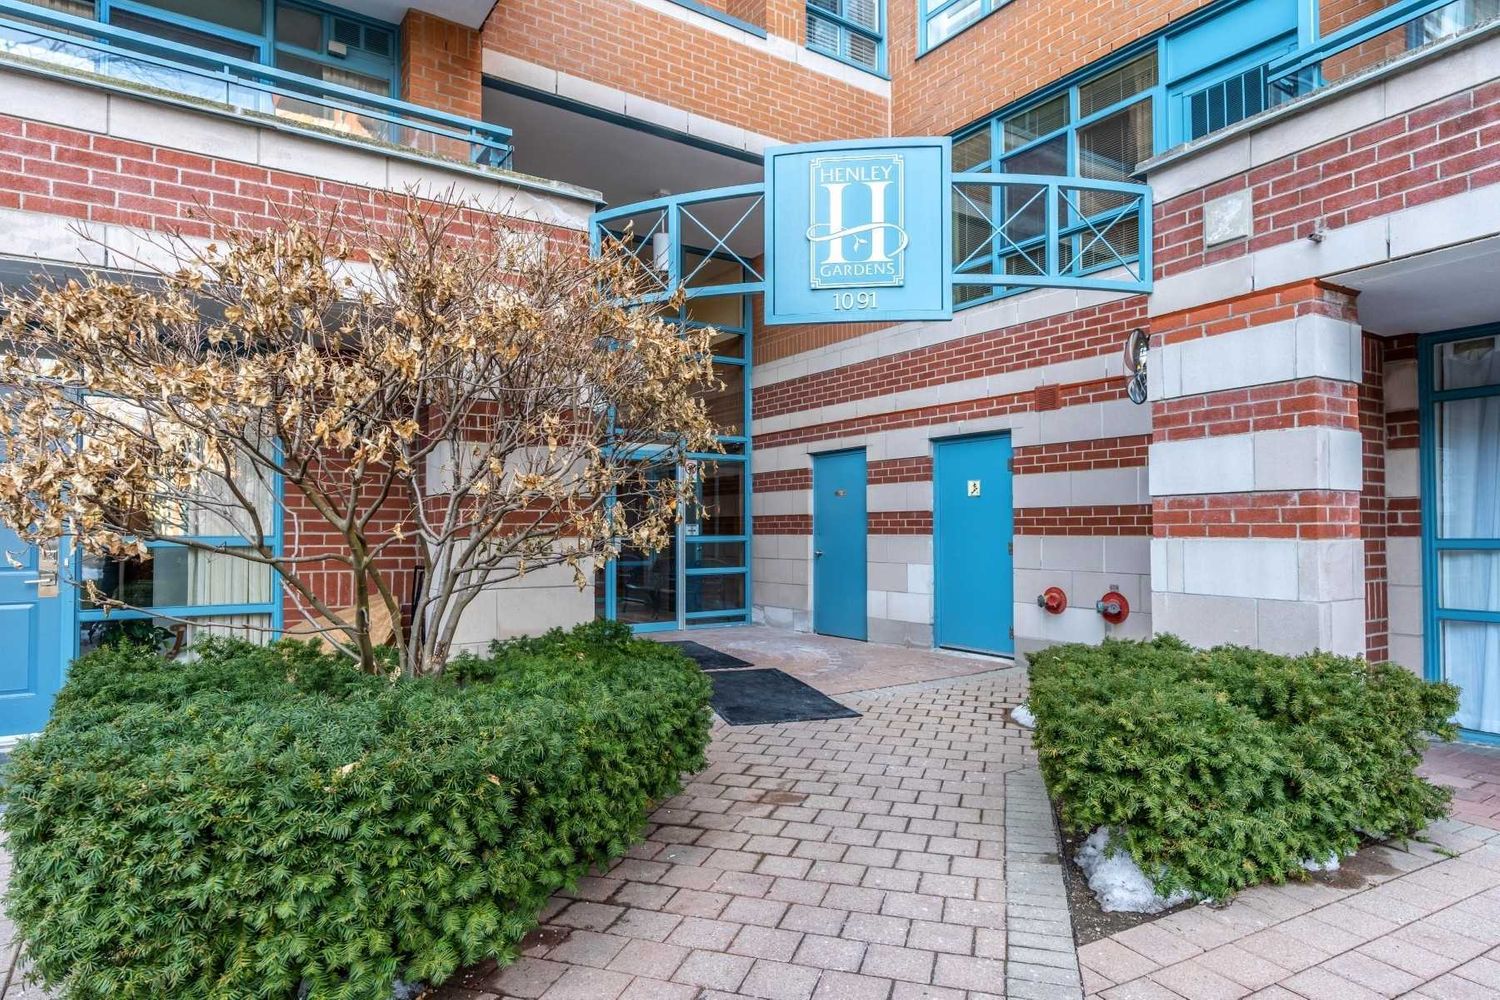 1091 Kingston Road. Henley Gardens Condos is located in  Scarborough, Toronto - image #2 of 2